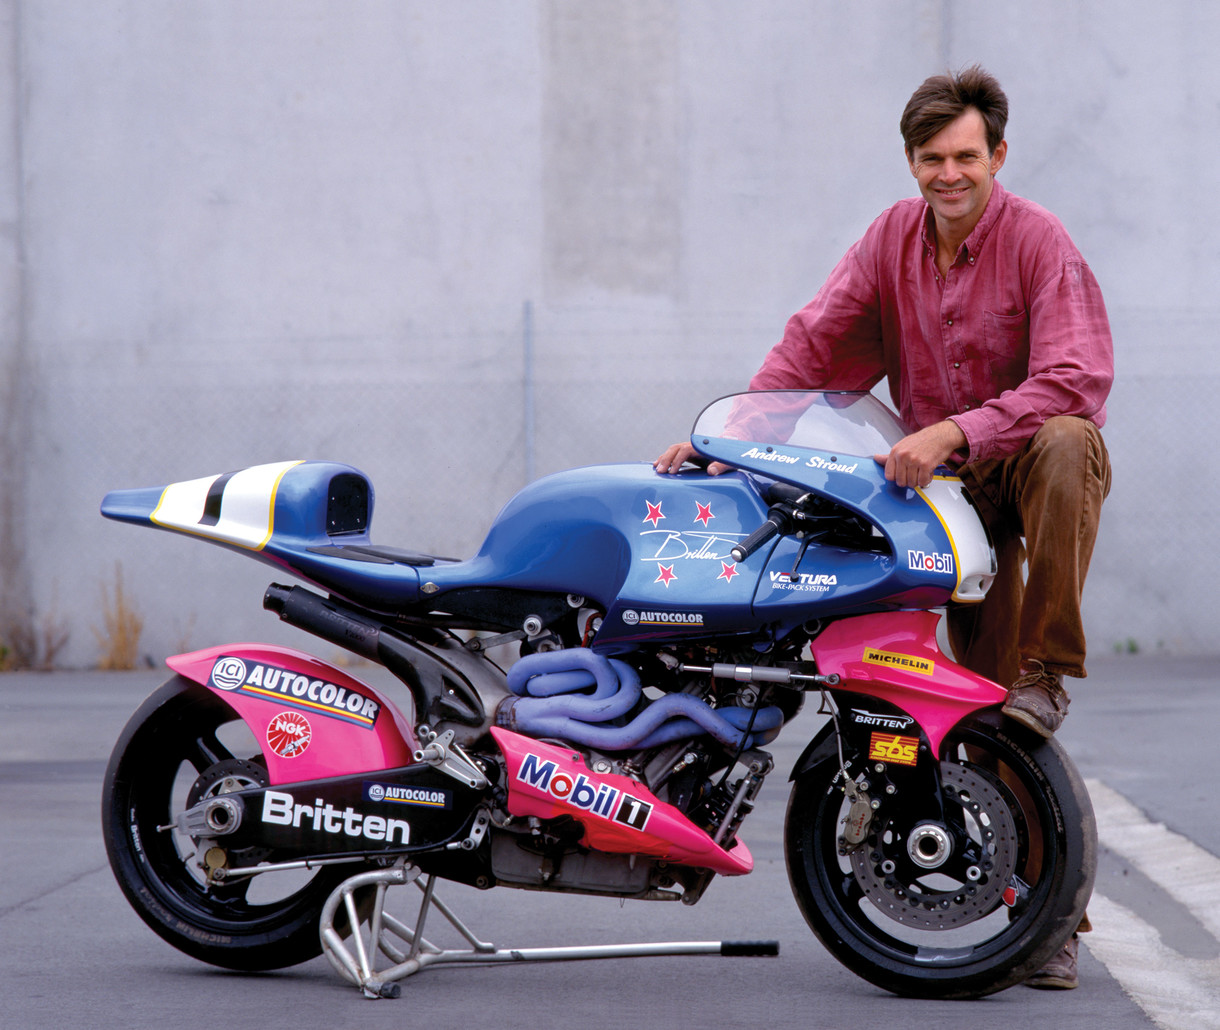 World-famous Britten superbike comes to the Gallery